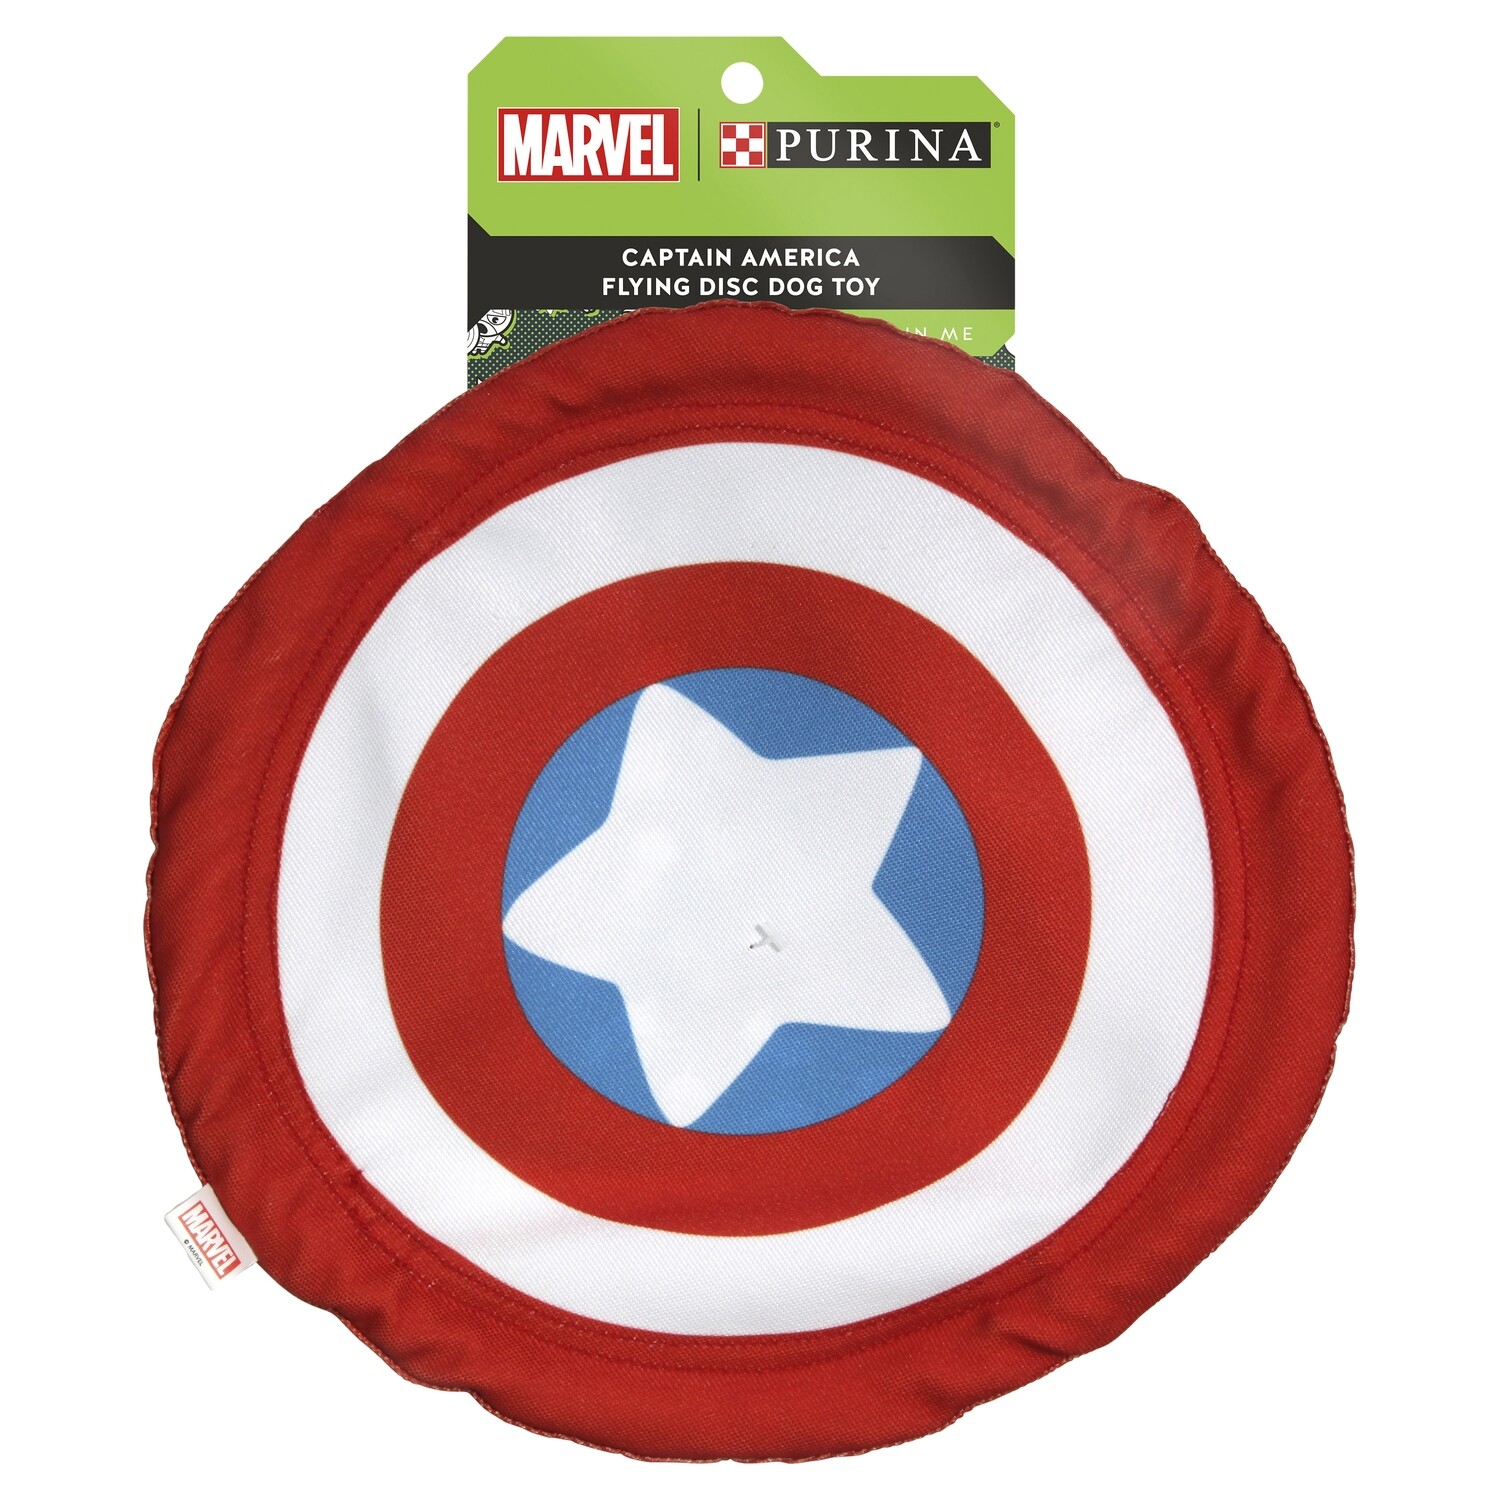 Purina Captain America Flying Disc